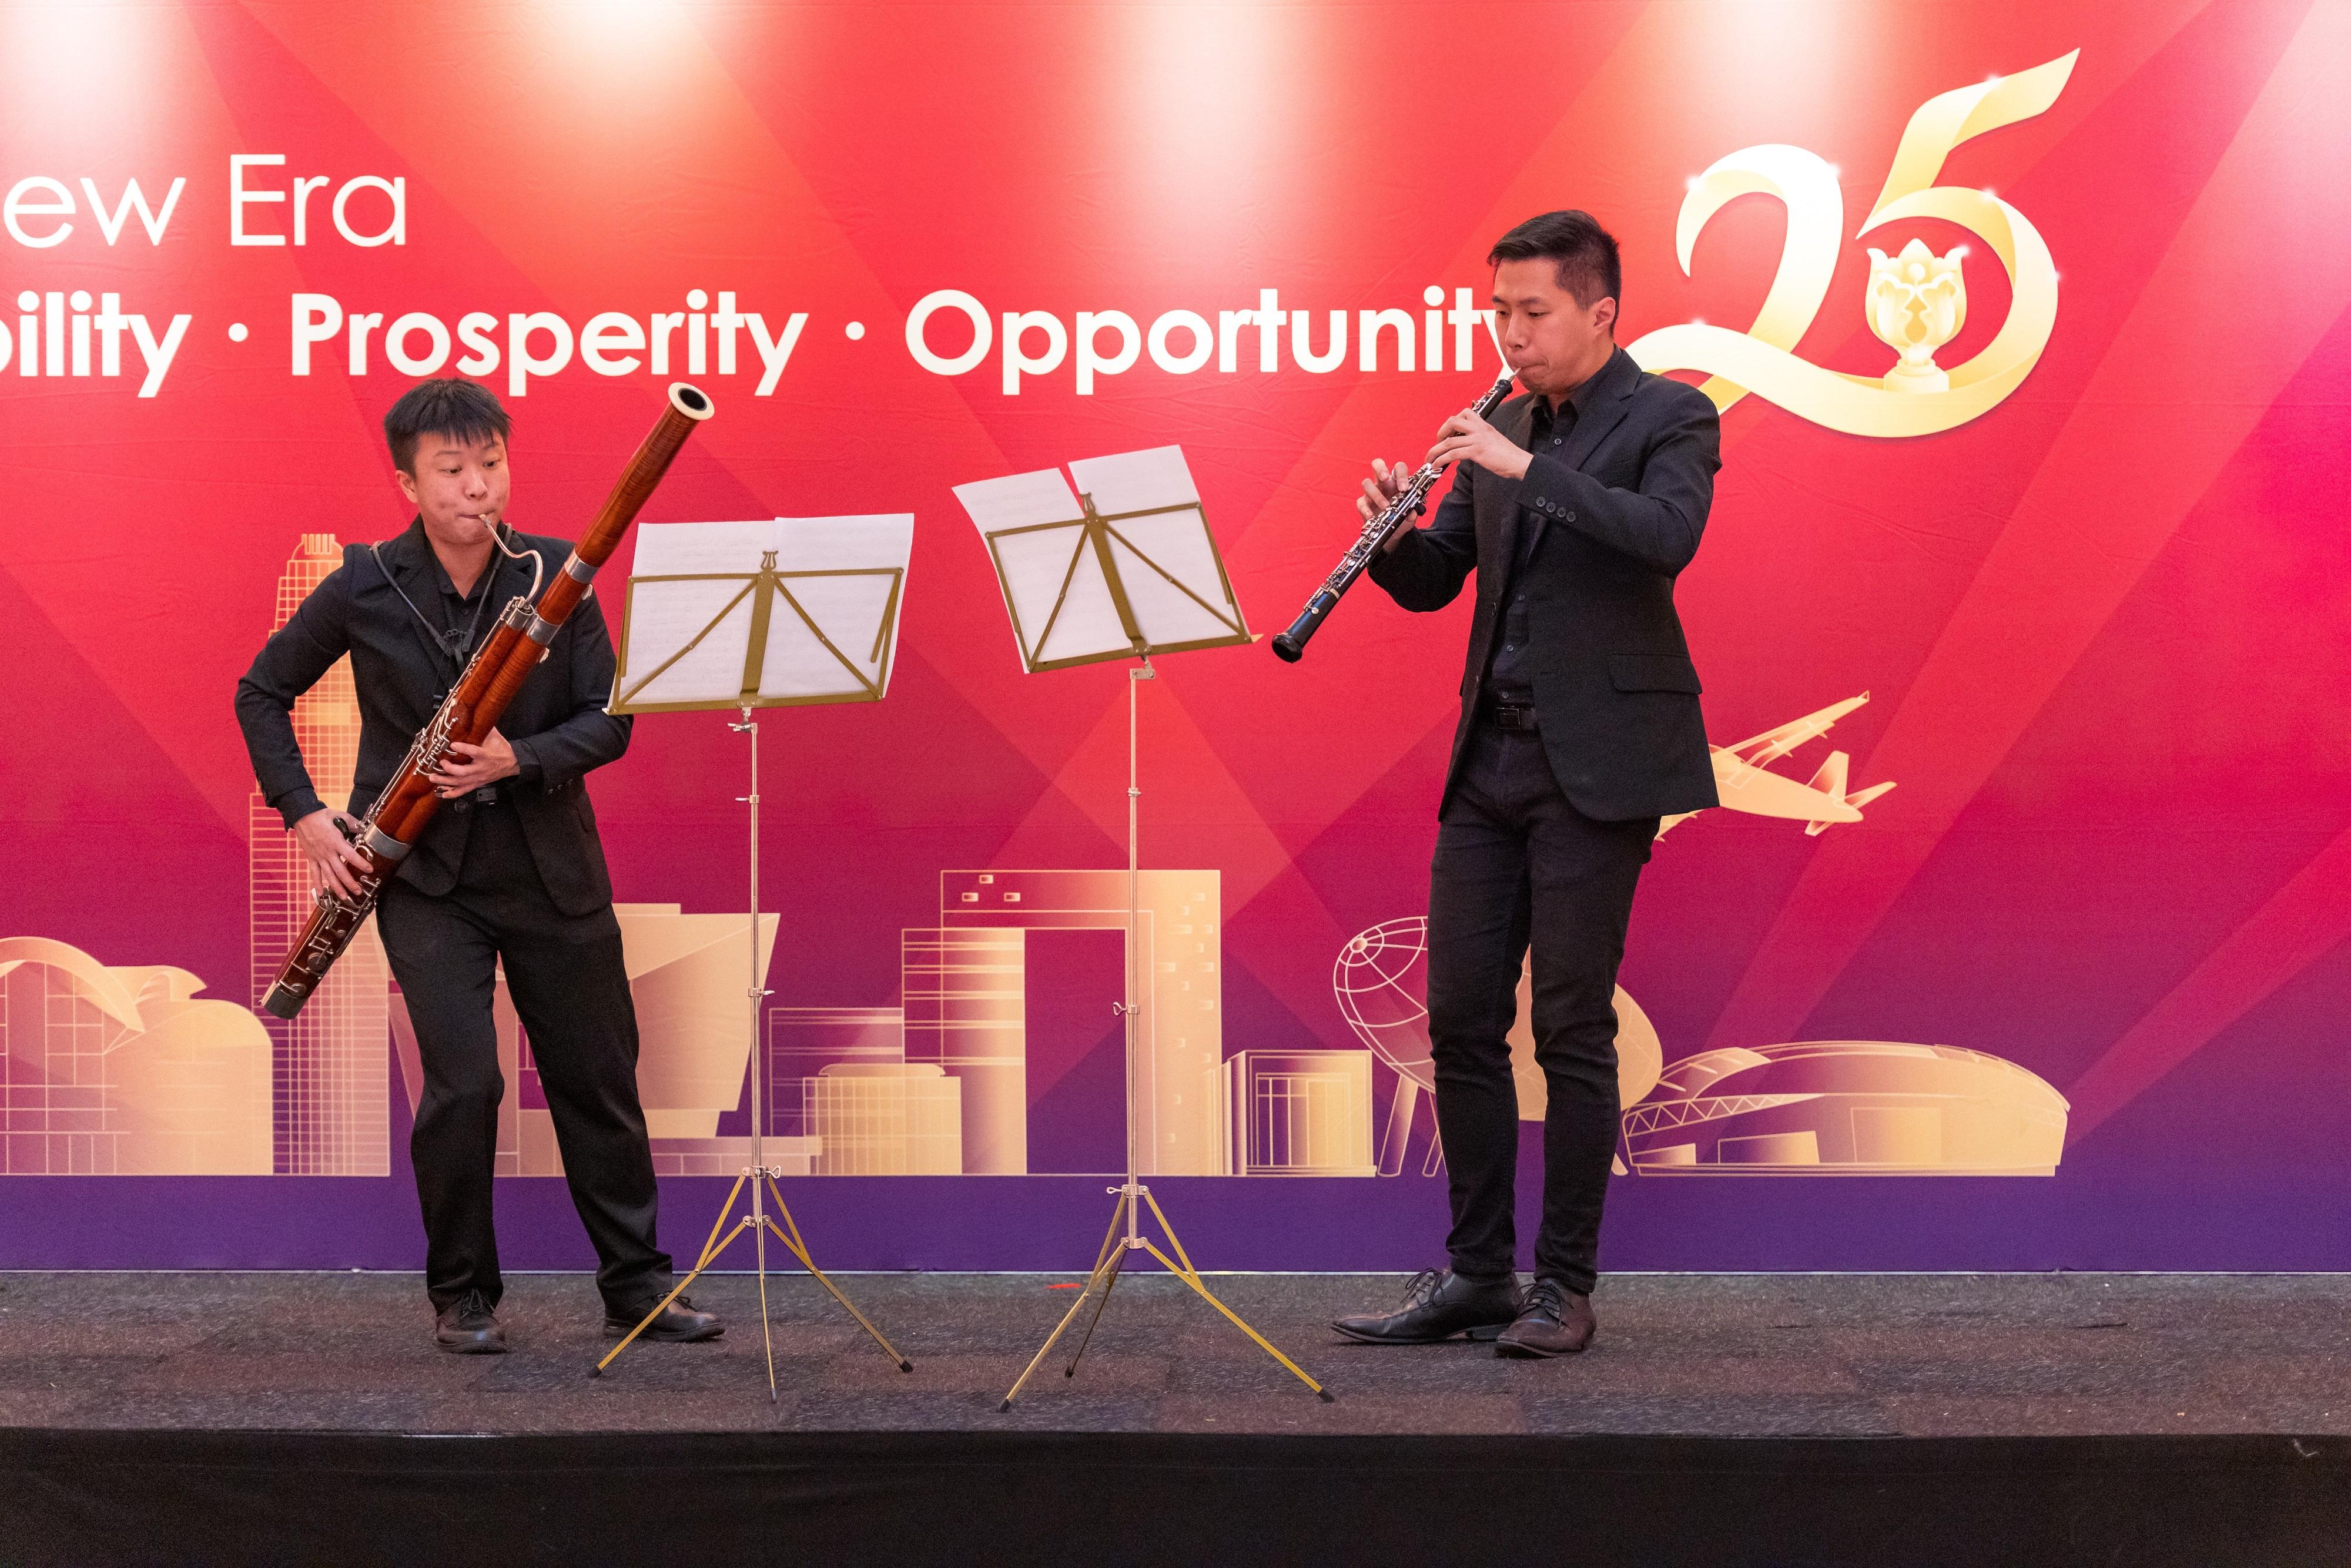 Talented young Hong Kong musicians Kaden Yim (left) and Matthew Chin (right), invited by the Hong Kong Economic and Trade Office in Brussels, perform a bassoon-oboe duet to guests at a gala event held in Brussels, Belgium, on June 30 (Brussels time) to celebrate the 25th anniversary of the establishment of the Hong Kong Special Administrative Region.